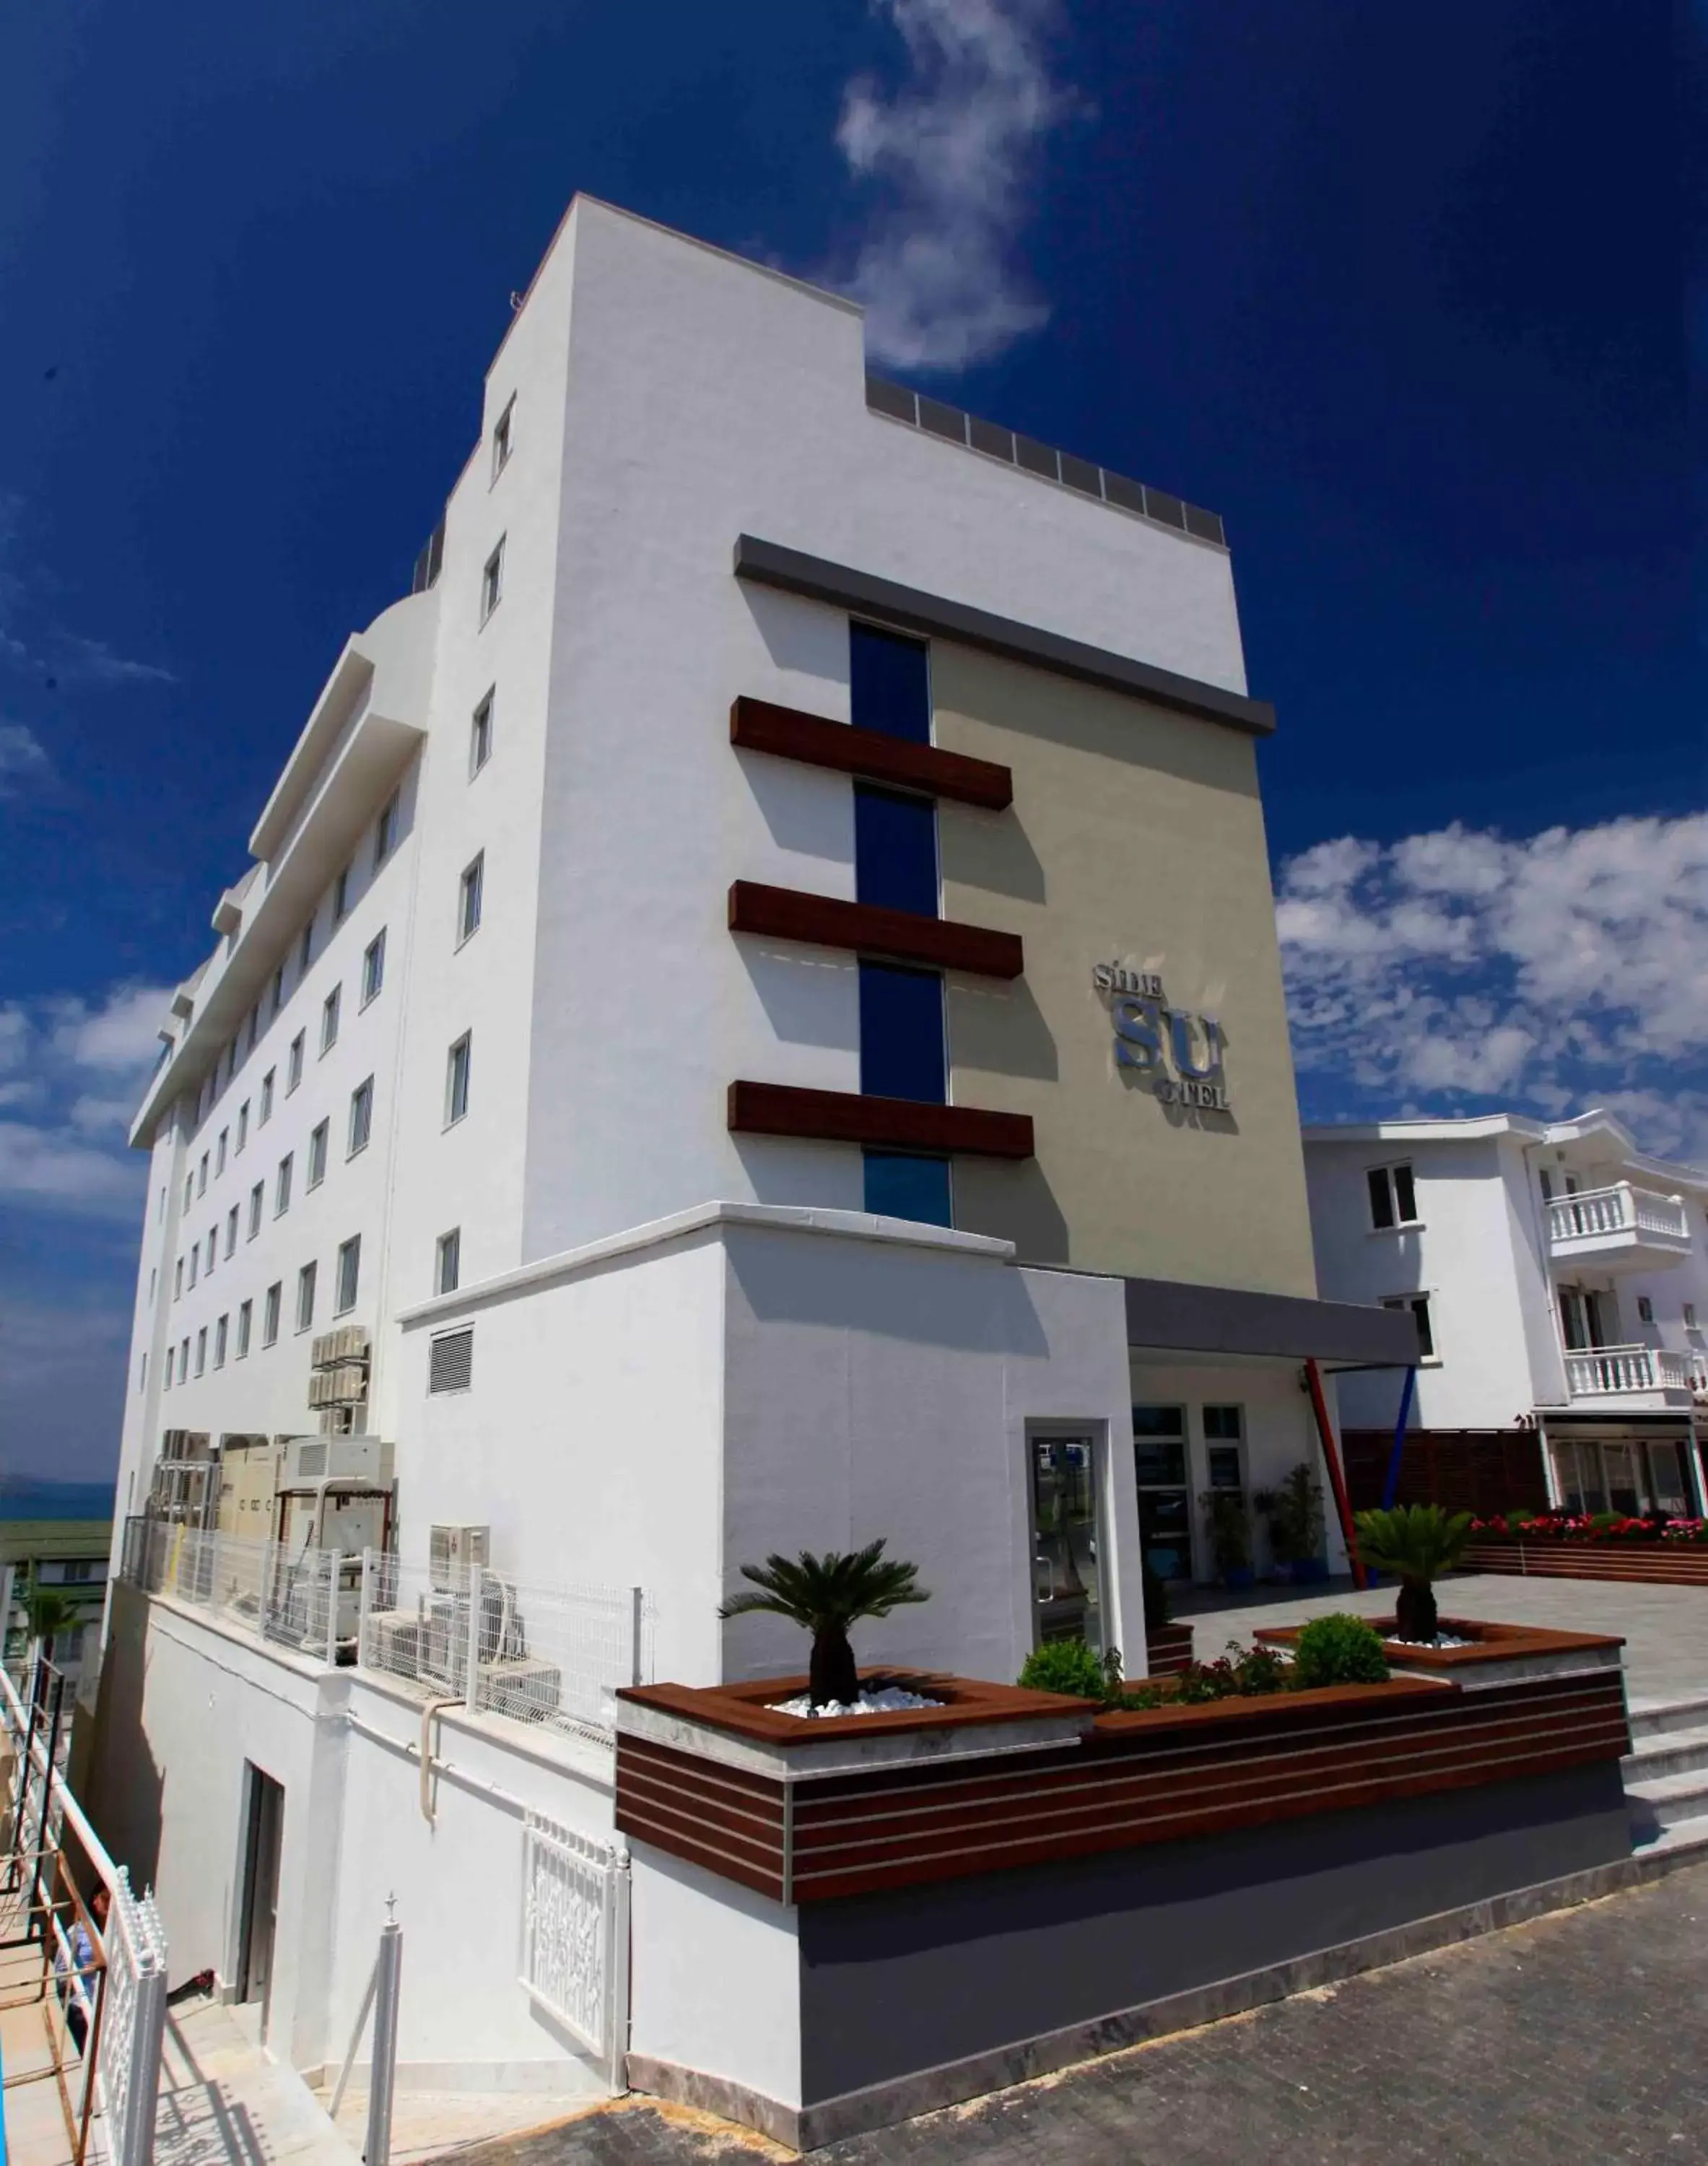 Facade/entrance, Property Building in Side Su Hotel - Adult Only (+16)